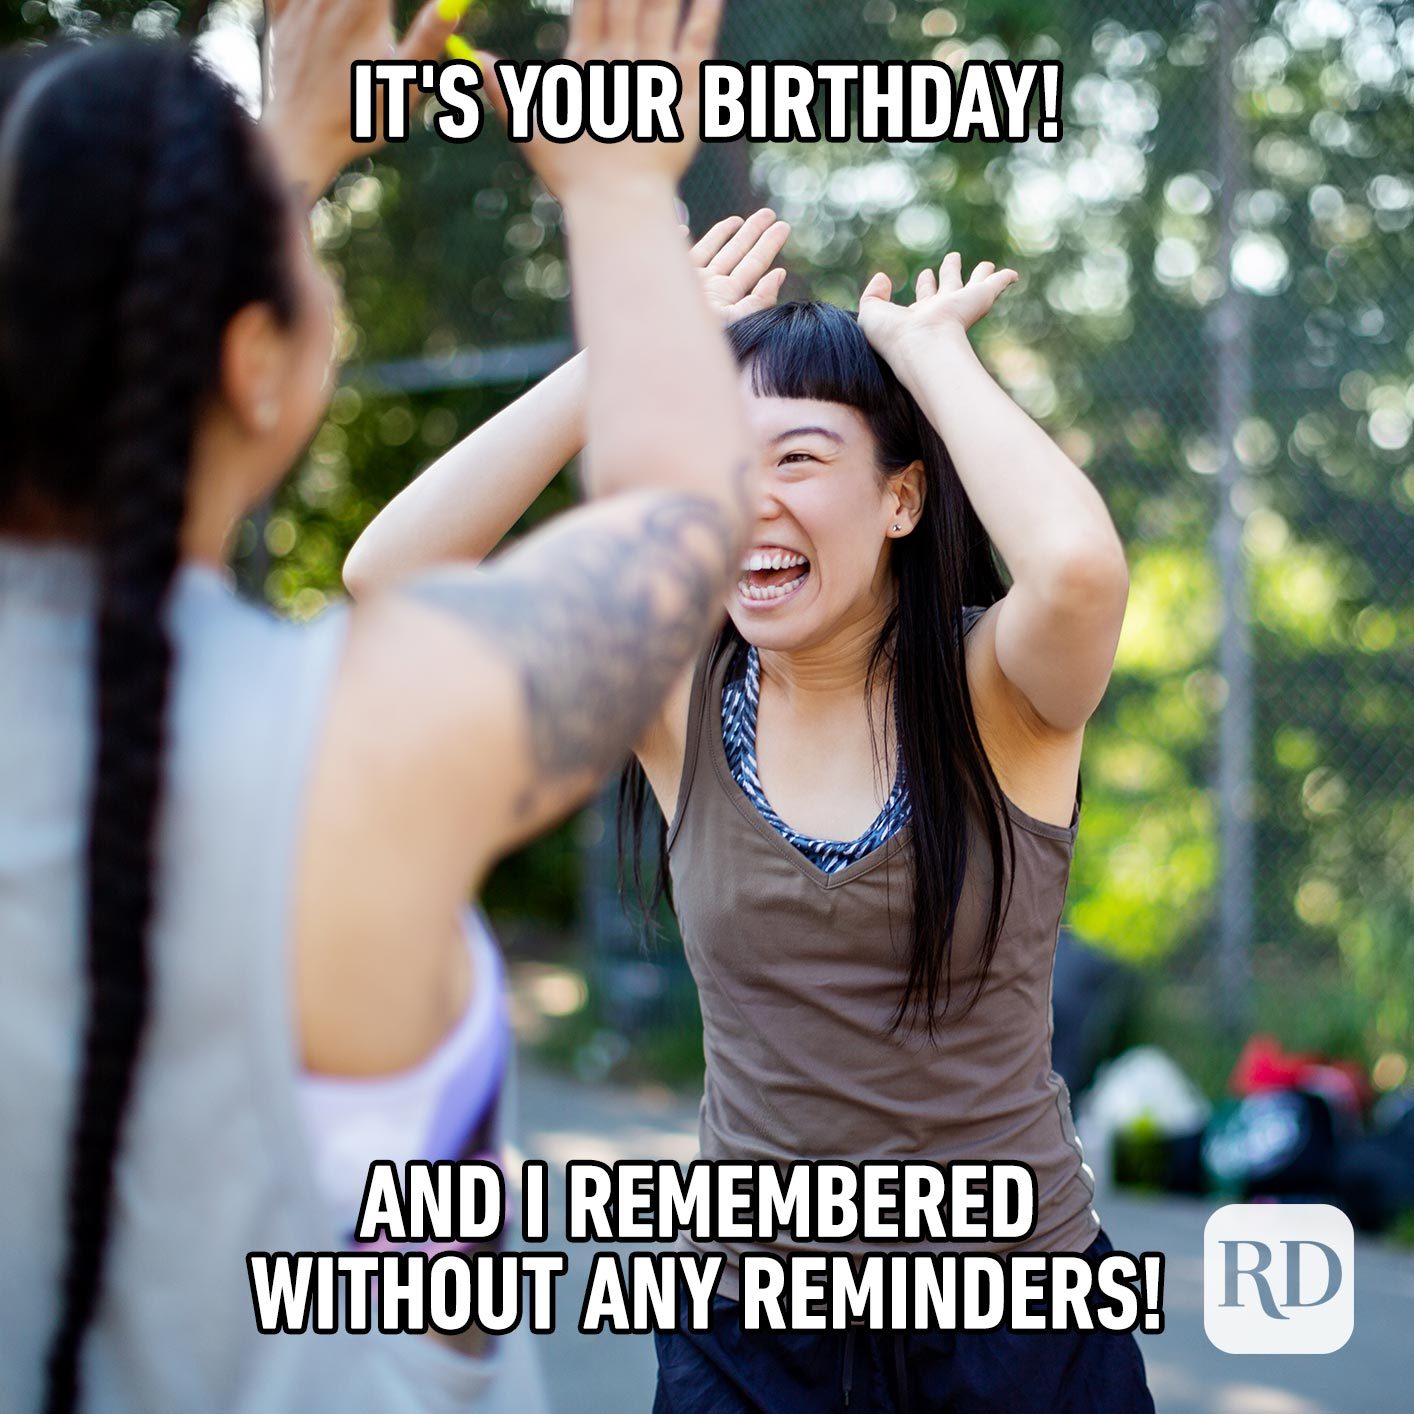 It's your birthday! And I remembered without any reminders!